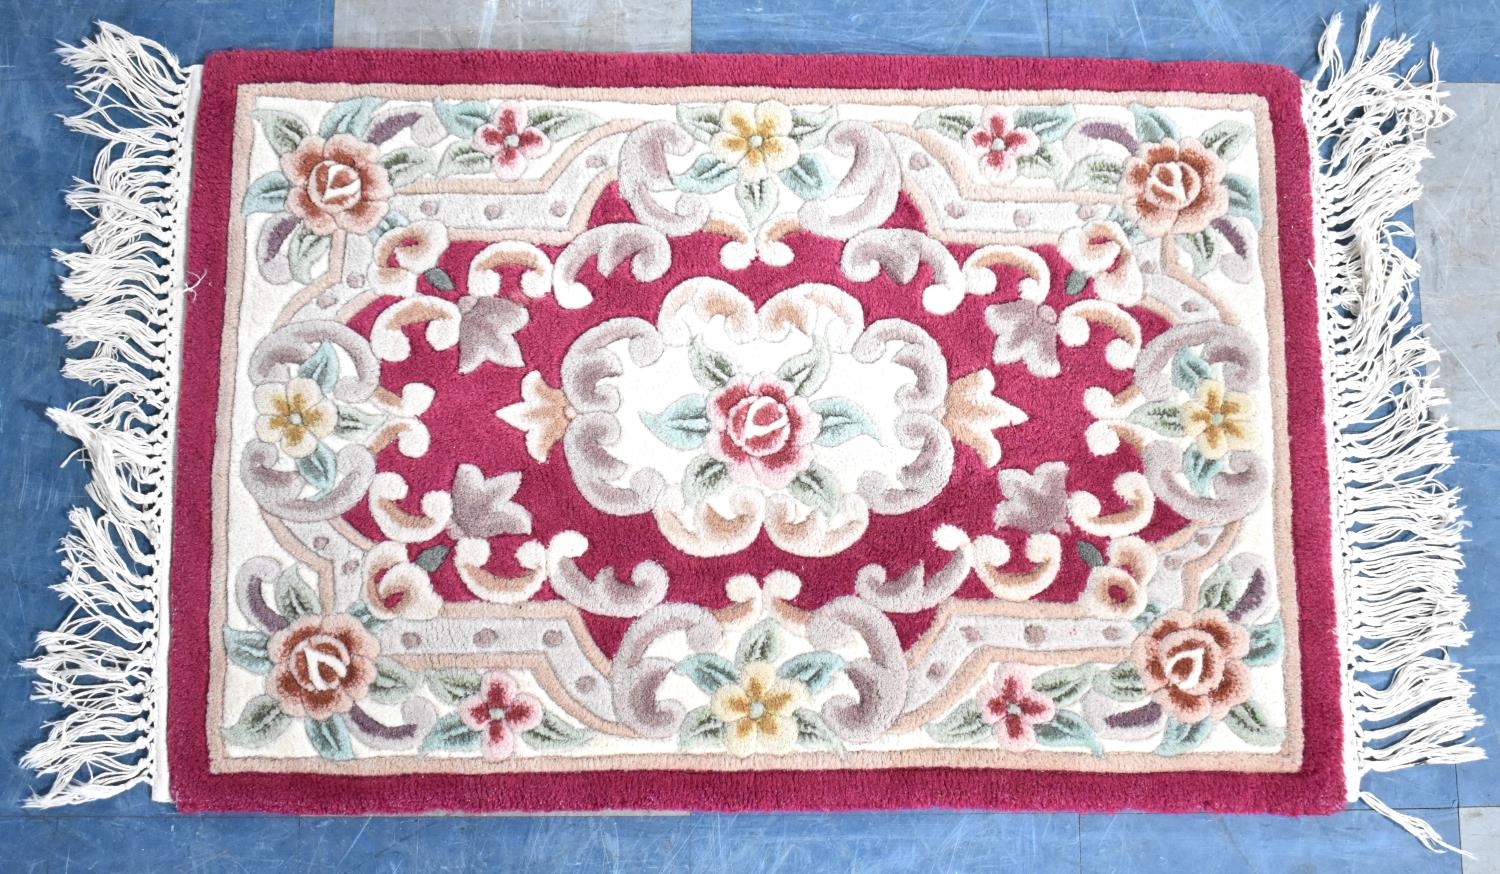 A Small Hearth Rug on Red Ground,91x61cms